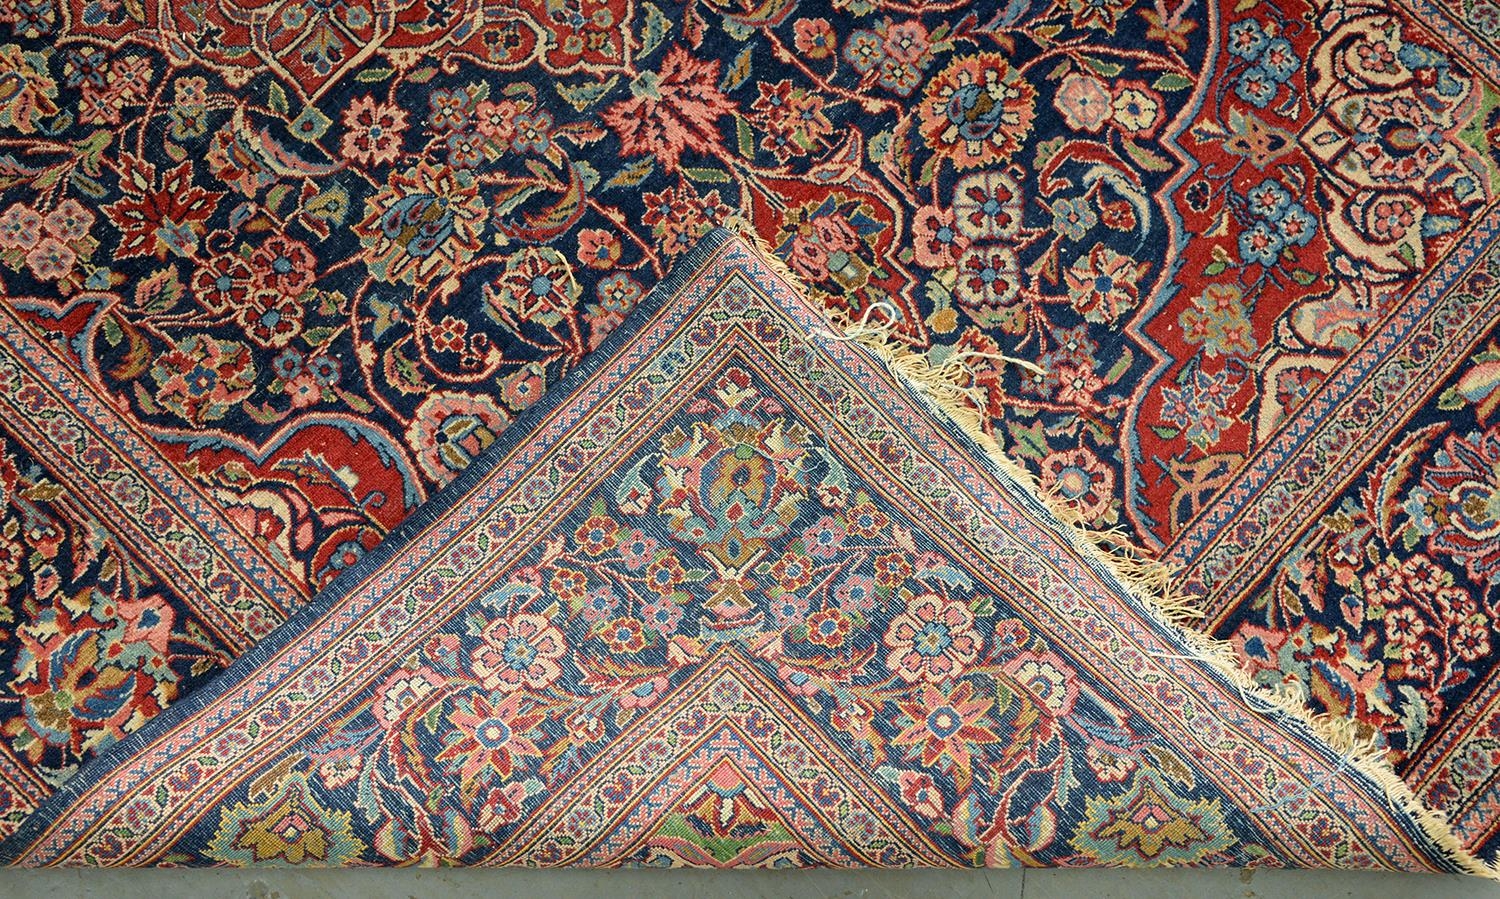 A Kashan rug, second quarter 20th c, 133 x 205cm Fair - good condition with wear at one end - Image 2 of 2